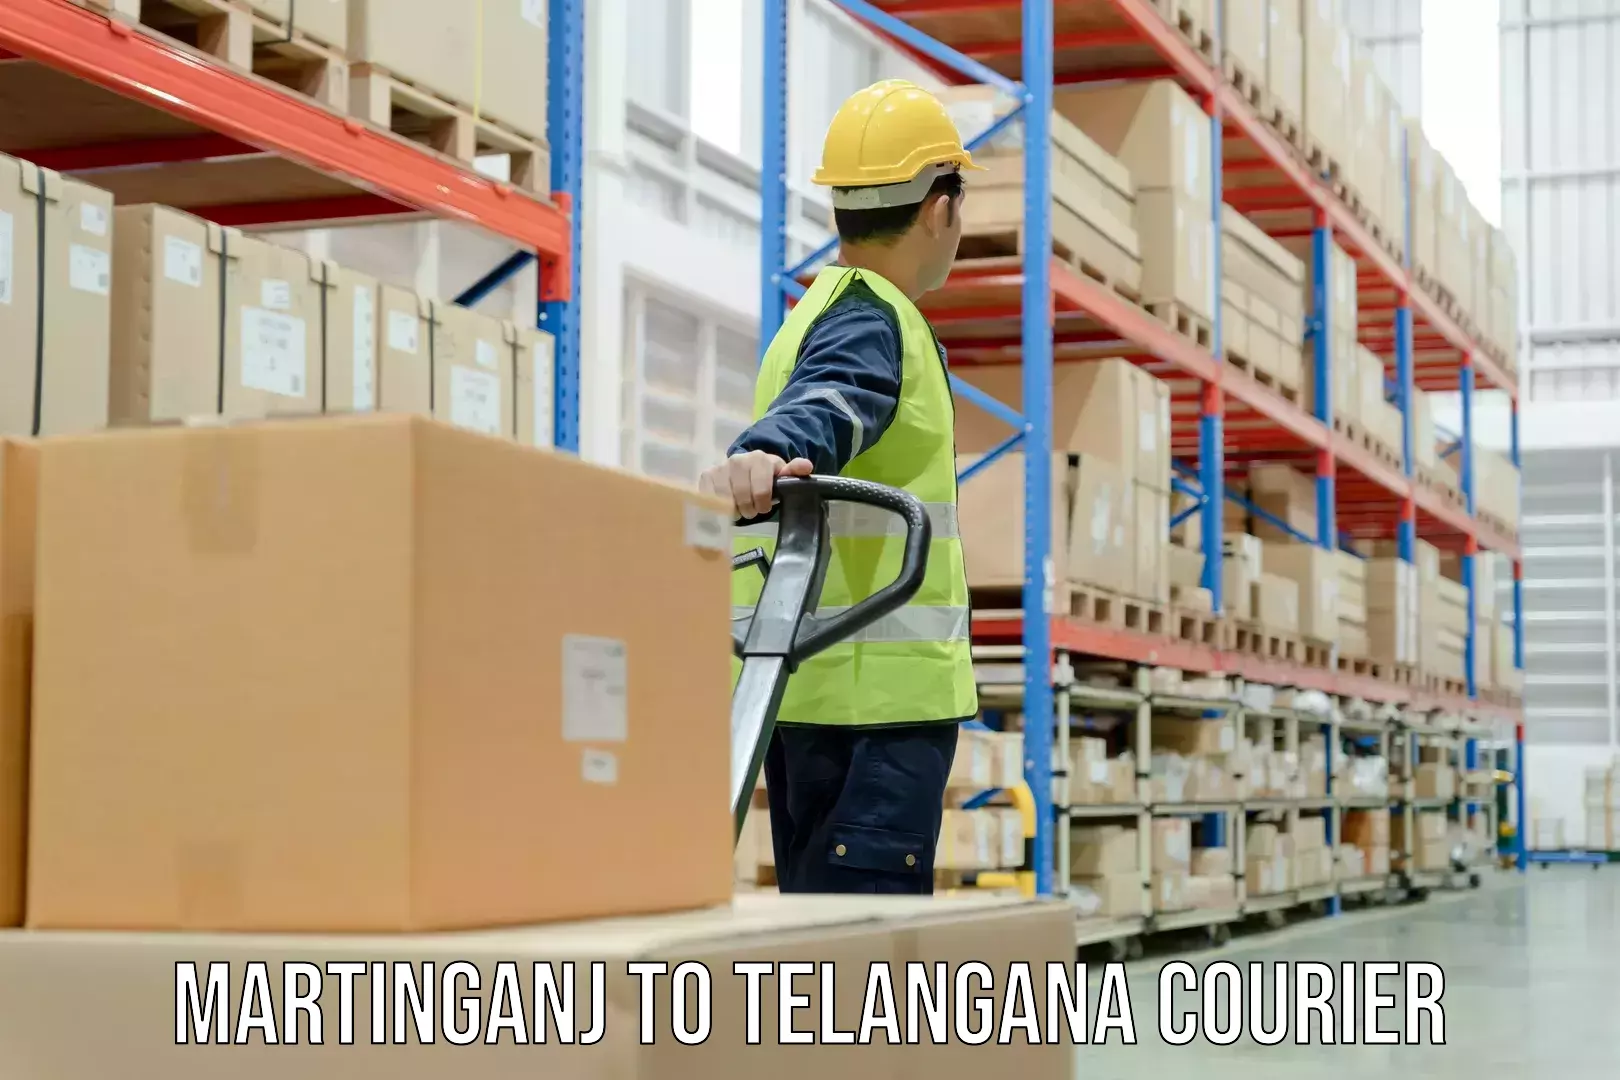 Return courier service in Martinganj to Netrang